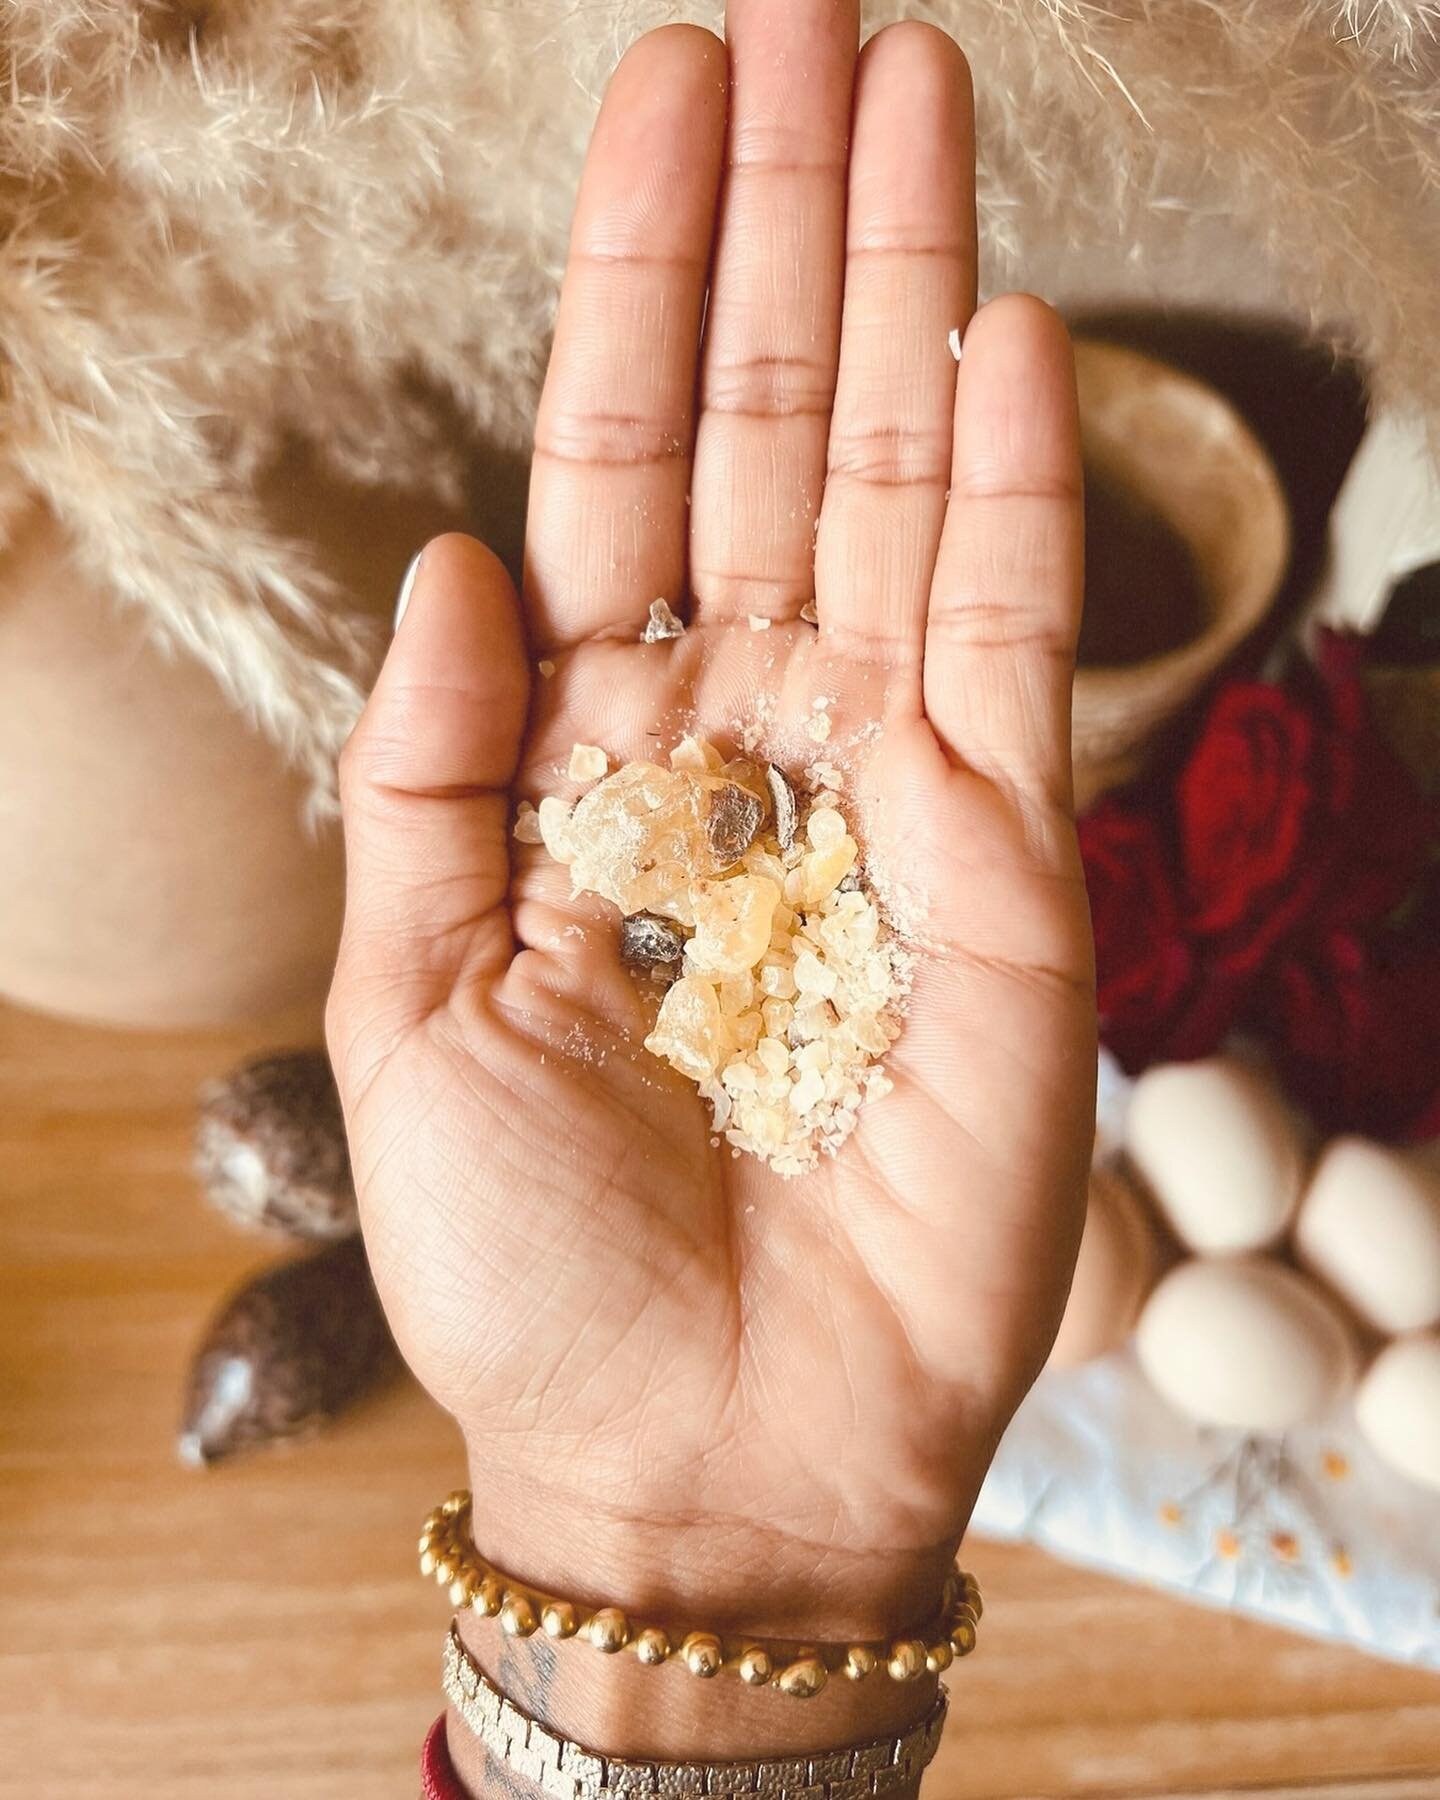 purity is powerful ✨🏆 // The homestead opens officially tomorrow (the 14th!) at 1pm EST 🤍 Set your alarms ;) #beauty #pureingredients #madewithintention #environmentallyfriendly